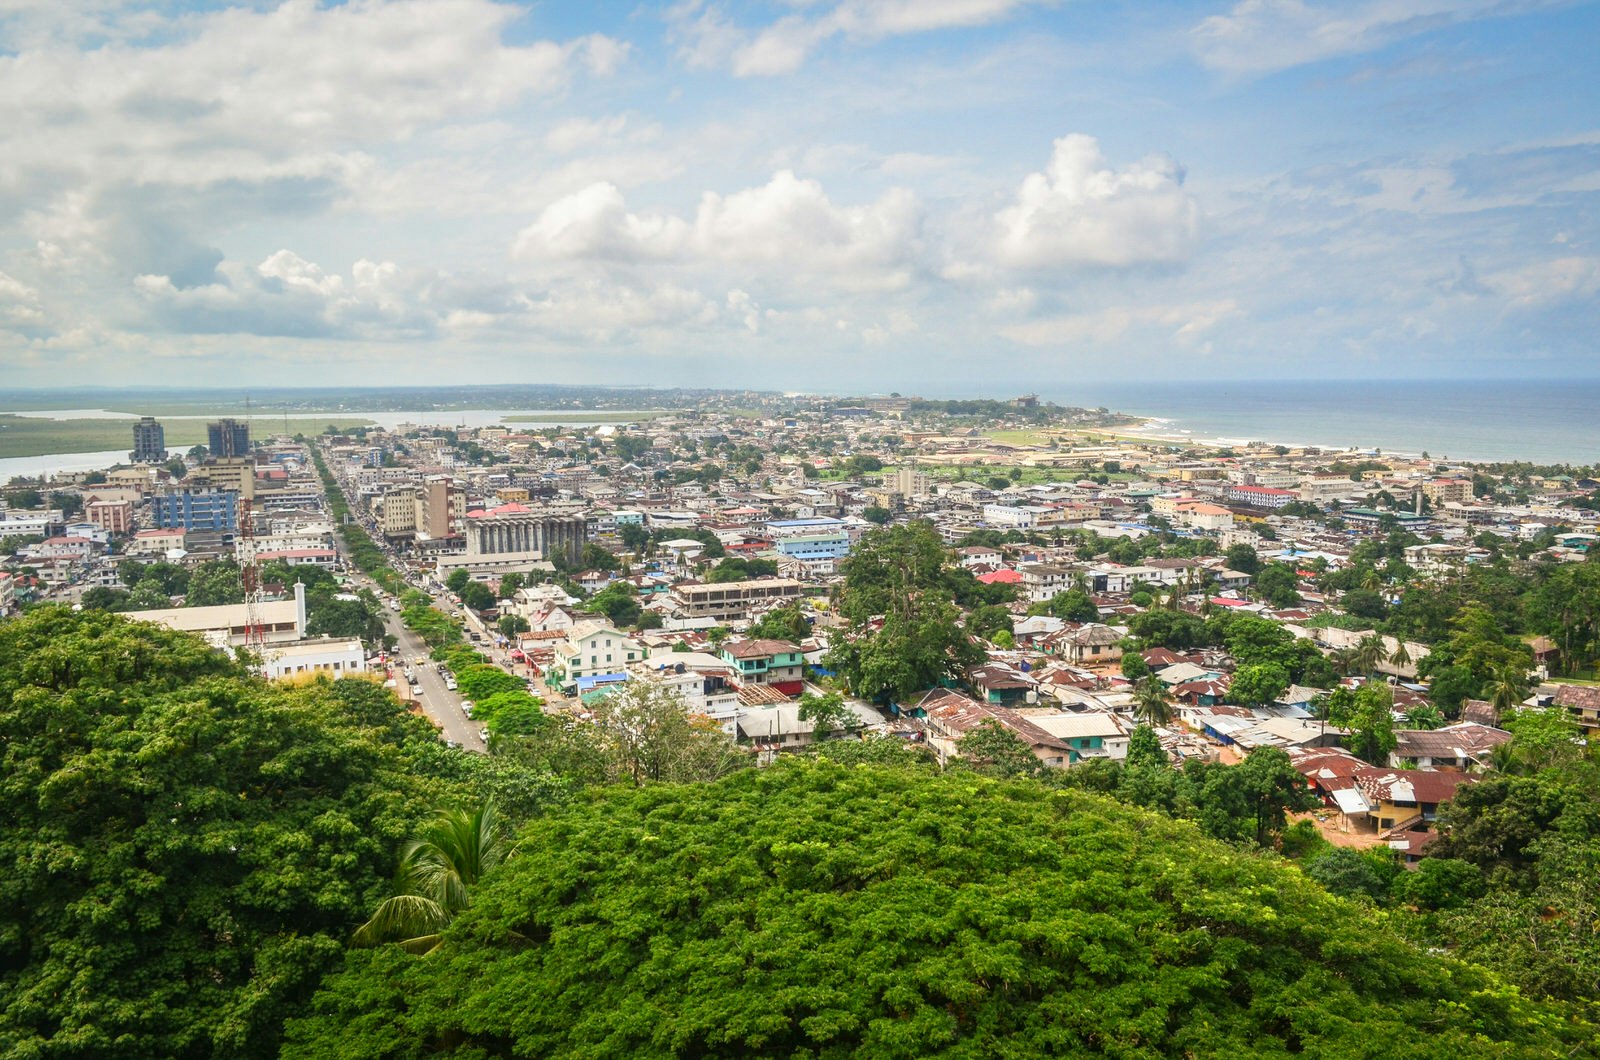 A view over the capital city of Monrovia and out to the ocean beyond; the main streets are lined with trees and the rooftops a mix of terracotta, rusted corrugated metal and silver tin